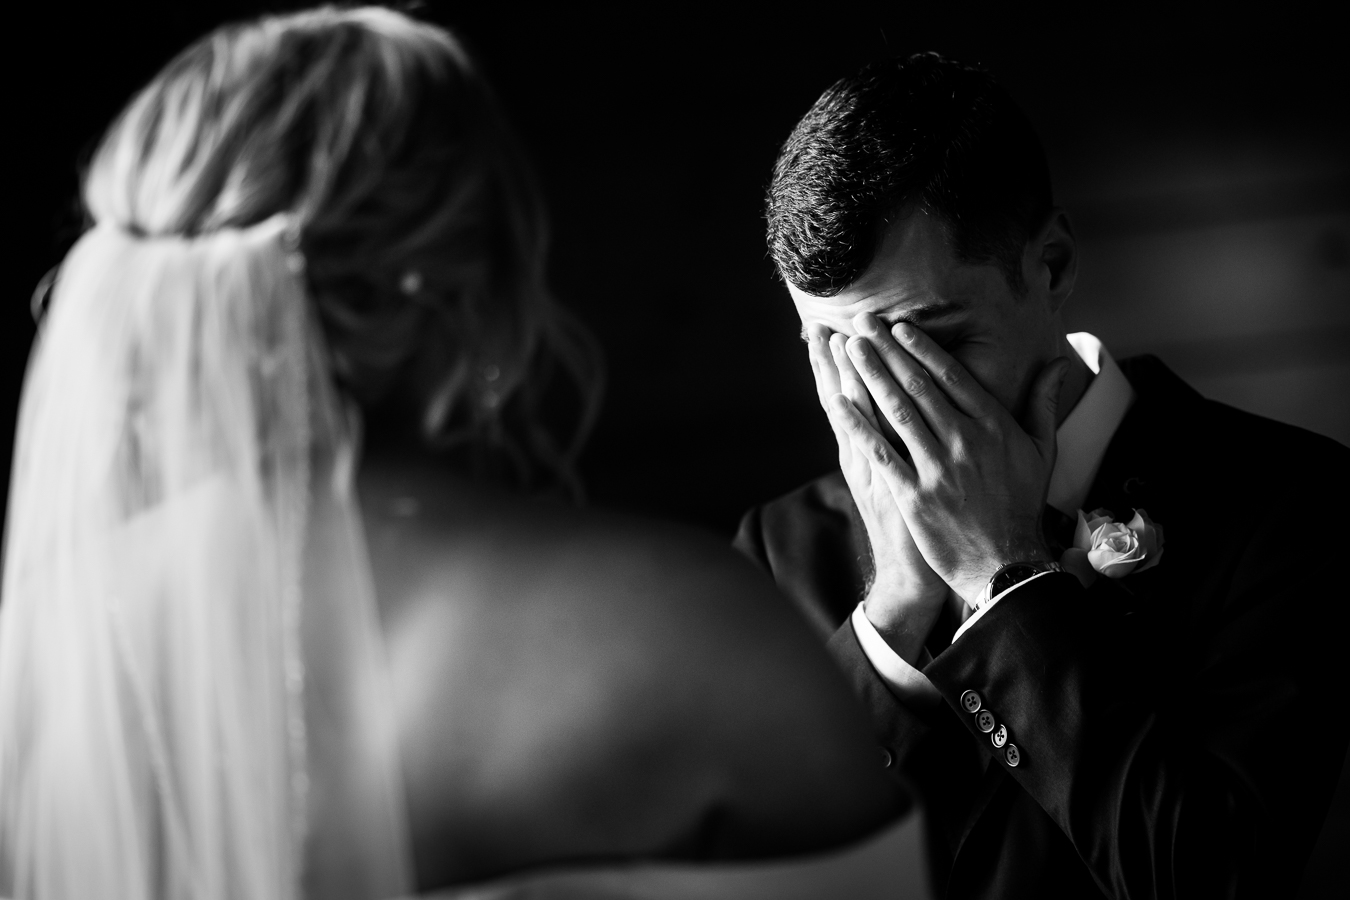 authentic wedding photographer, lisa rhinehart, captures this authentic black and white image of the groom holding his hands to his face as he cries from seeing his bride for the first time before their wedding ceremony in Virginia 